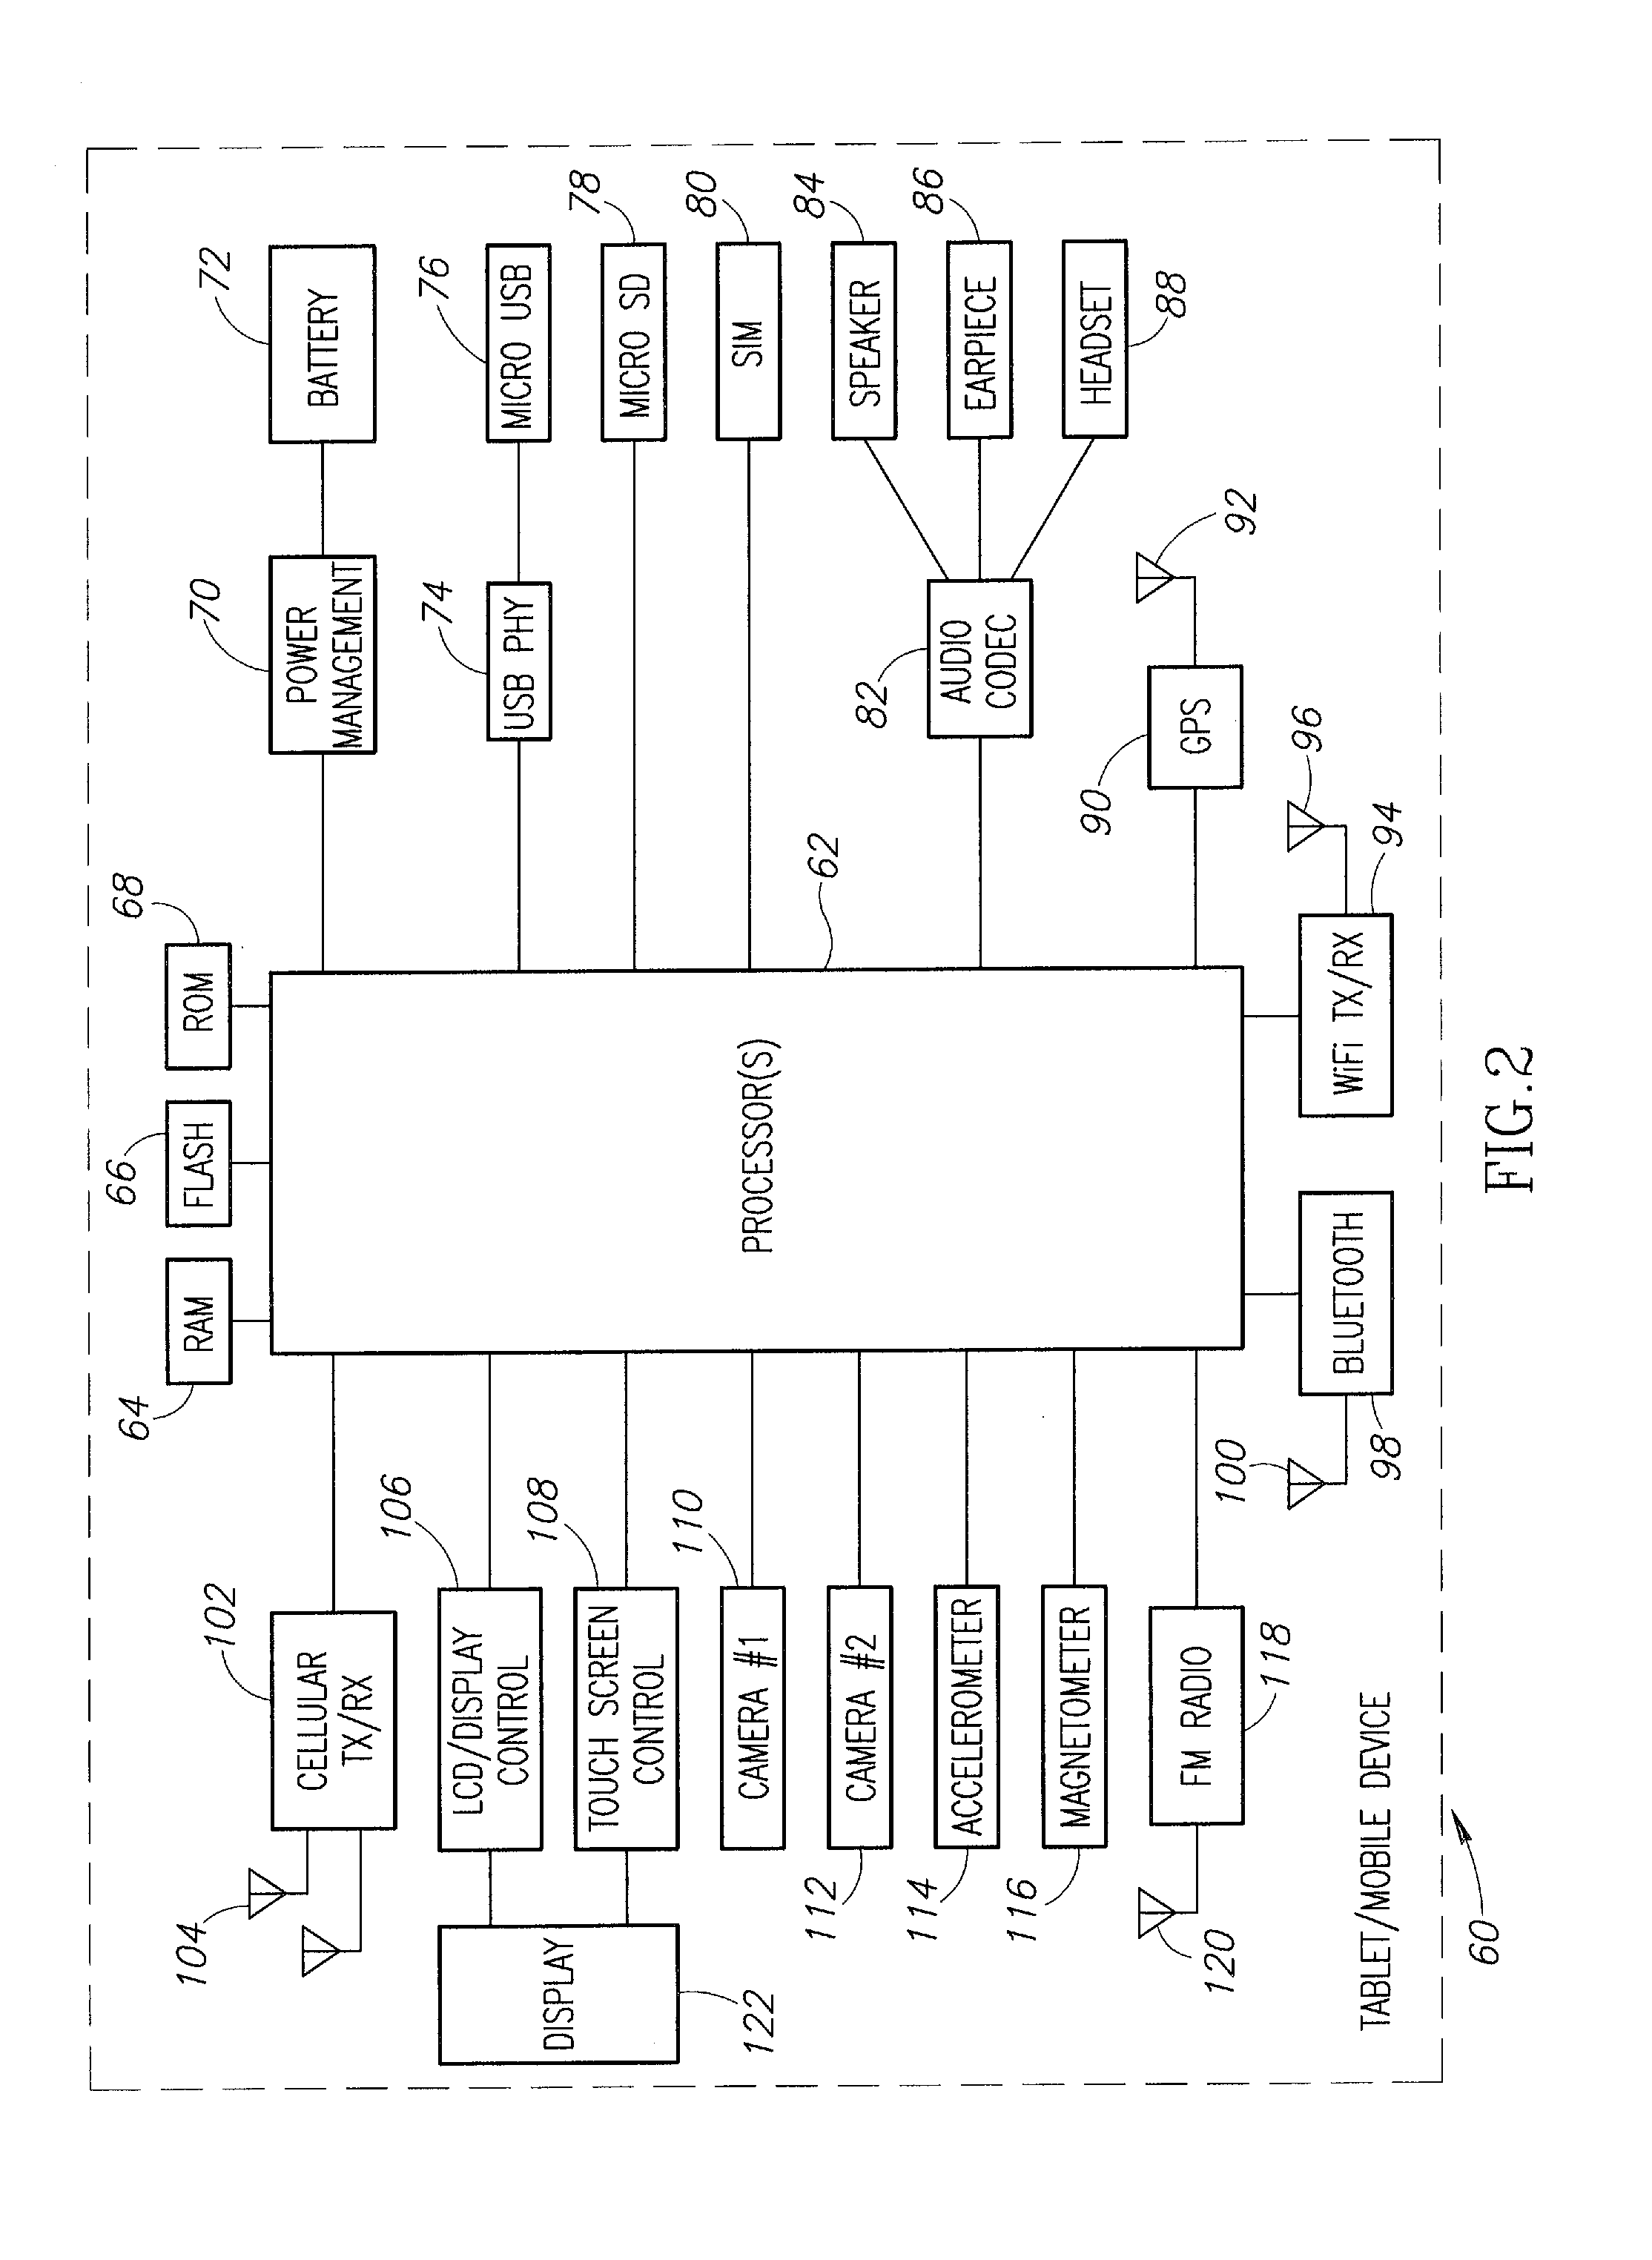 System and Method of Browsing Electronic Catalogs from Multiple Merchants